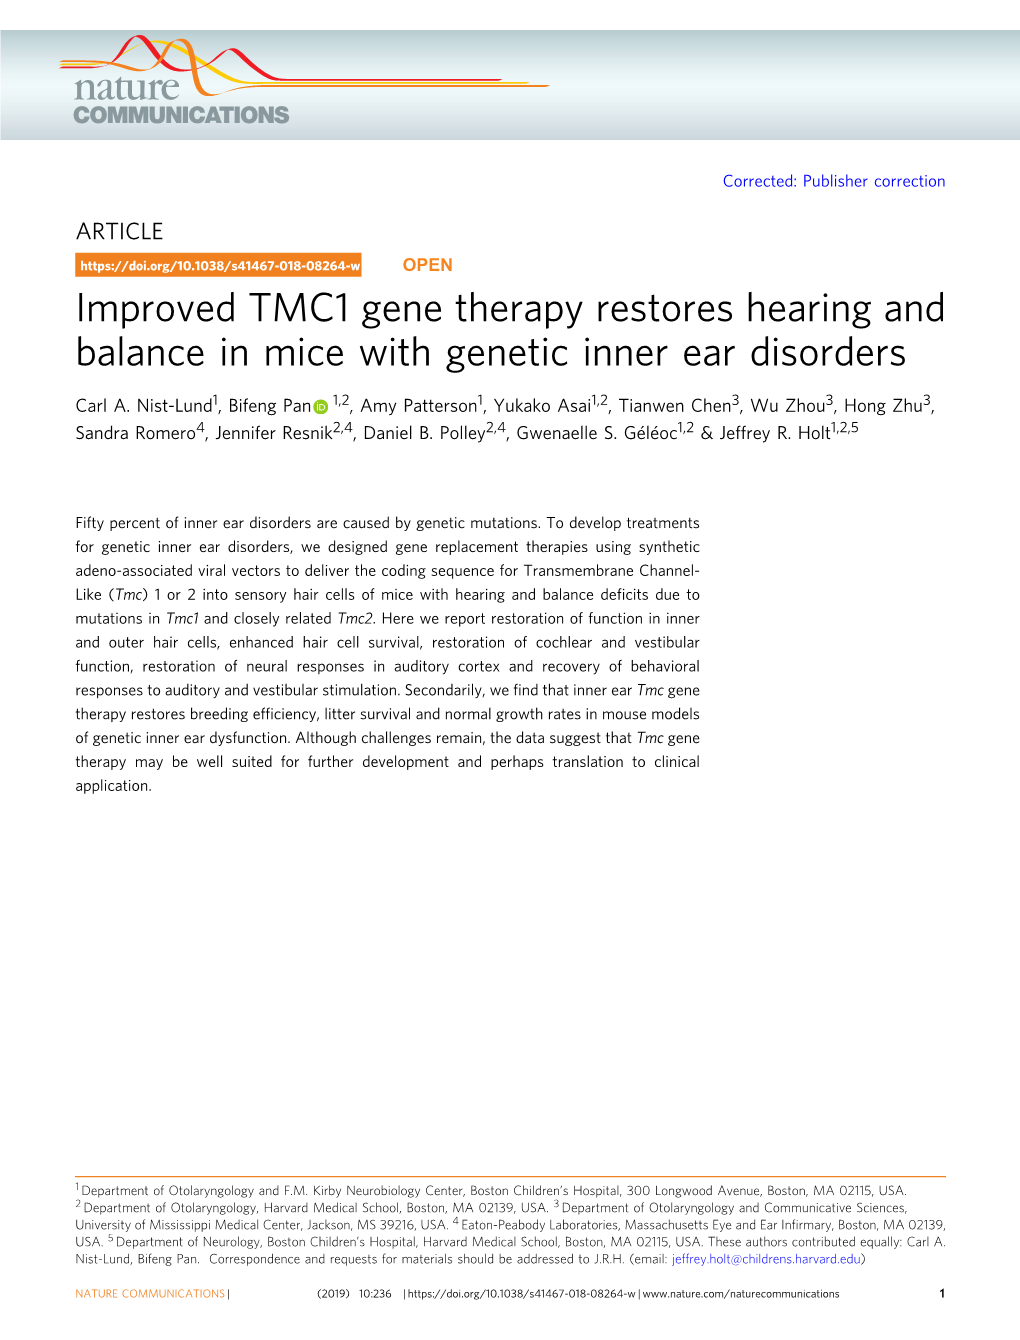 Improved TMC1 Gene Therapy Restores Hearing and Balance in Mice with Genetic Inner Ear Disorders